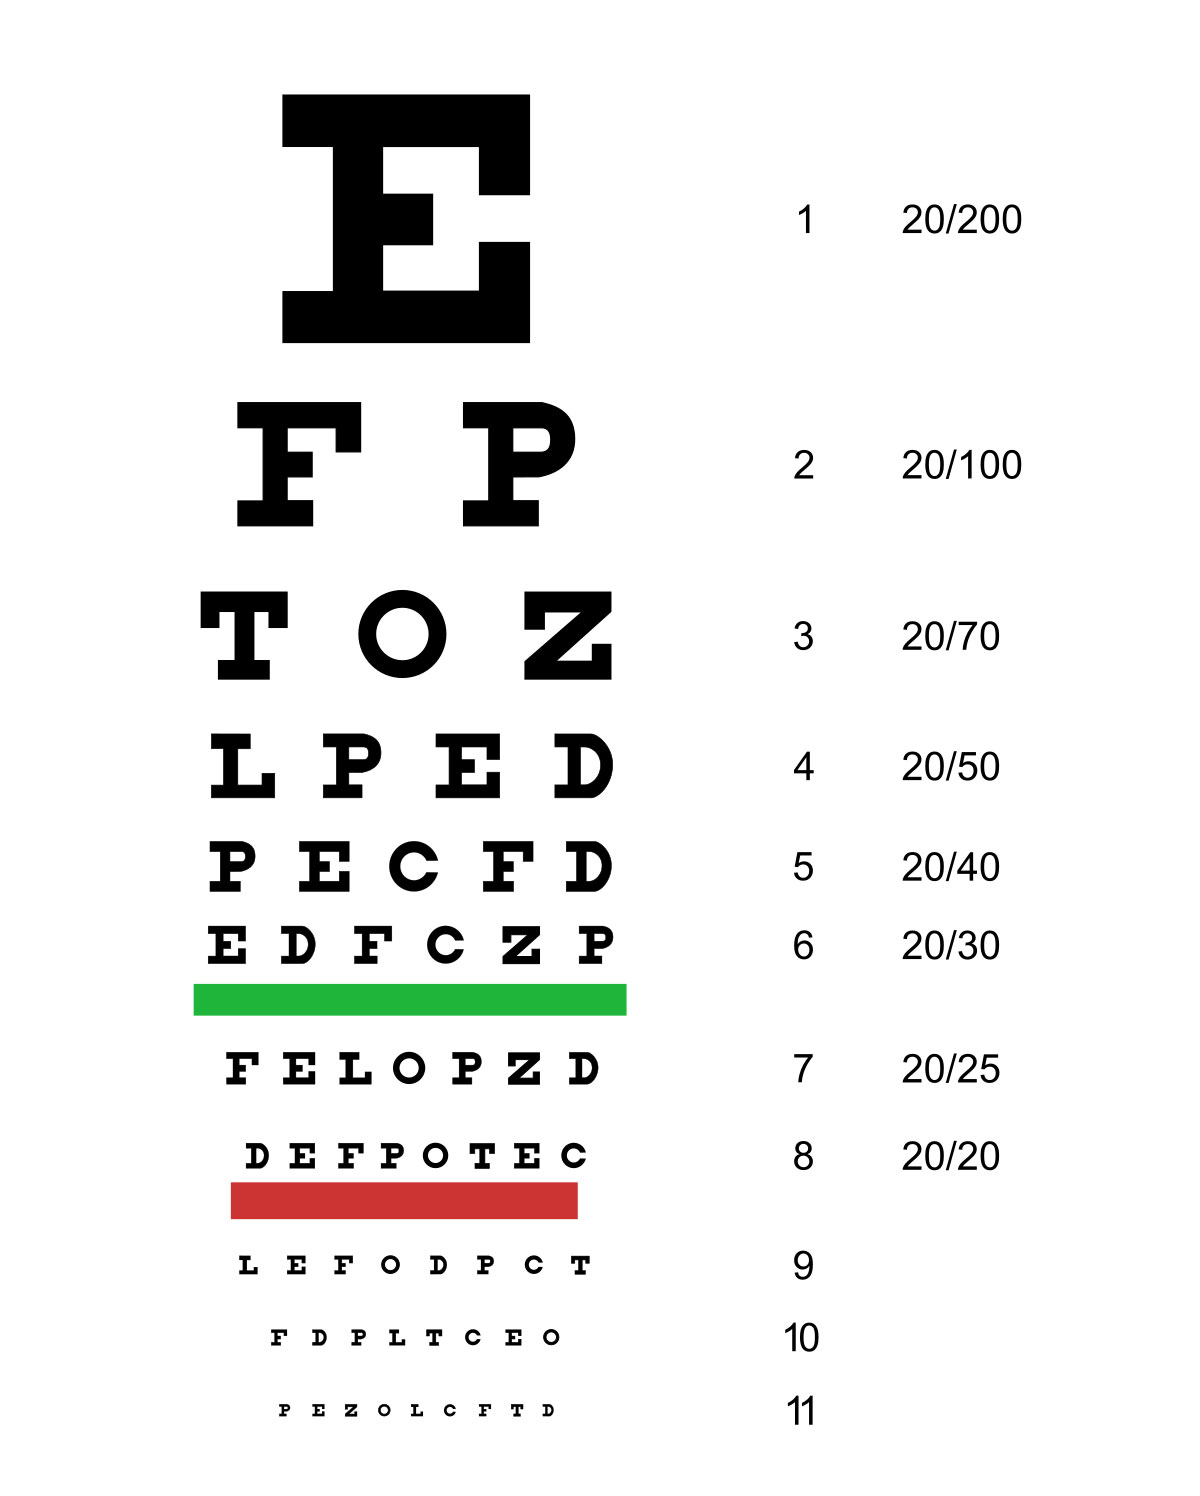 Snellen chart is to measure one's visual acuity from 20 feet away